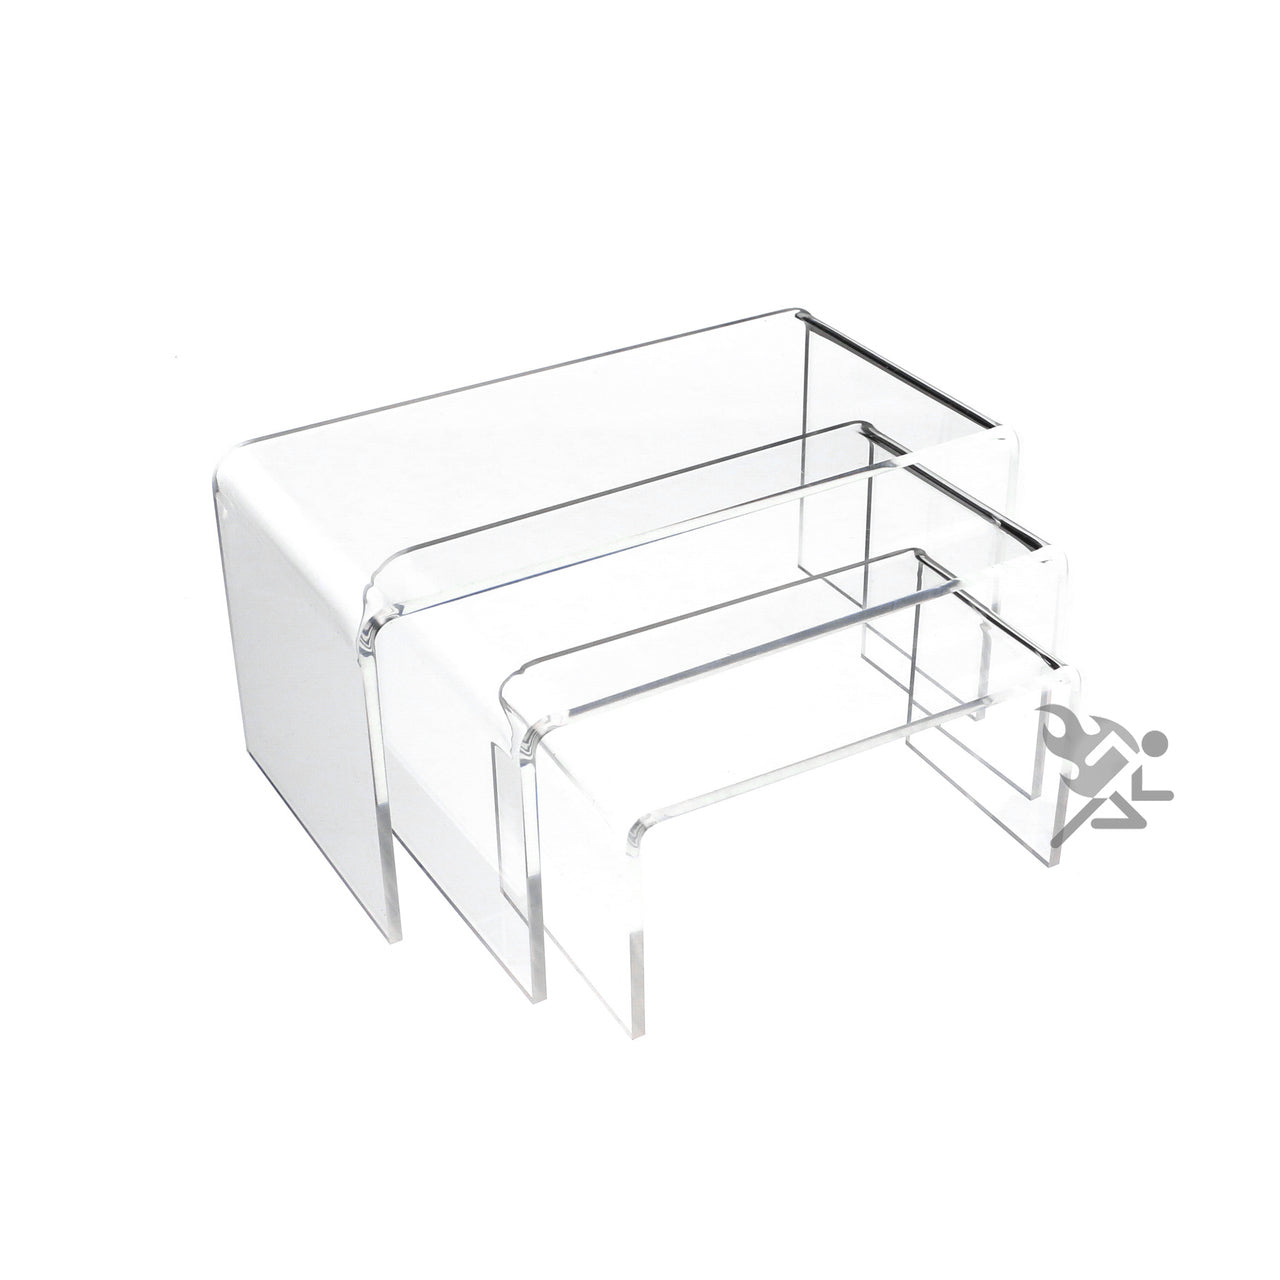 Clear Acrylic 1/8" Short Rectangle Riser 3 Piece Set Display Stands